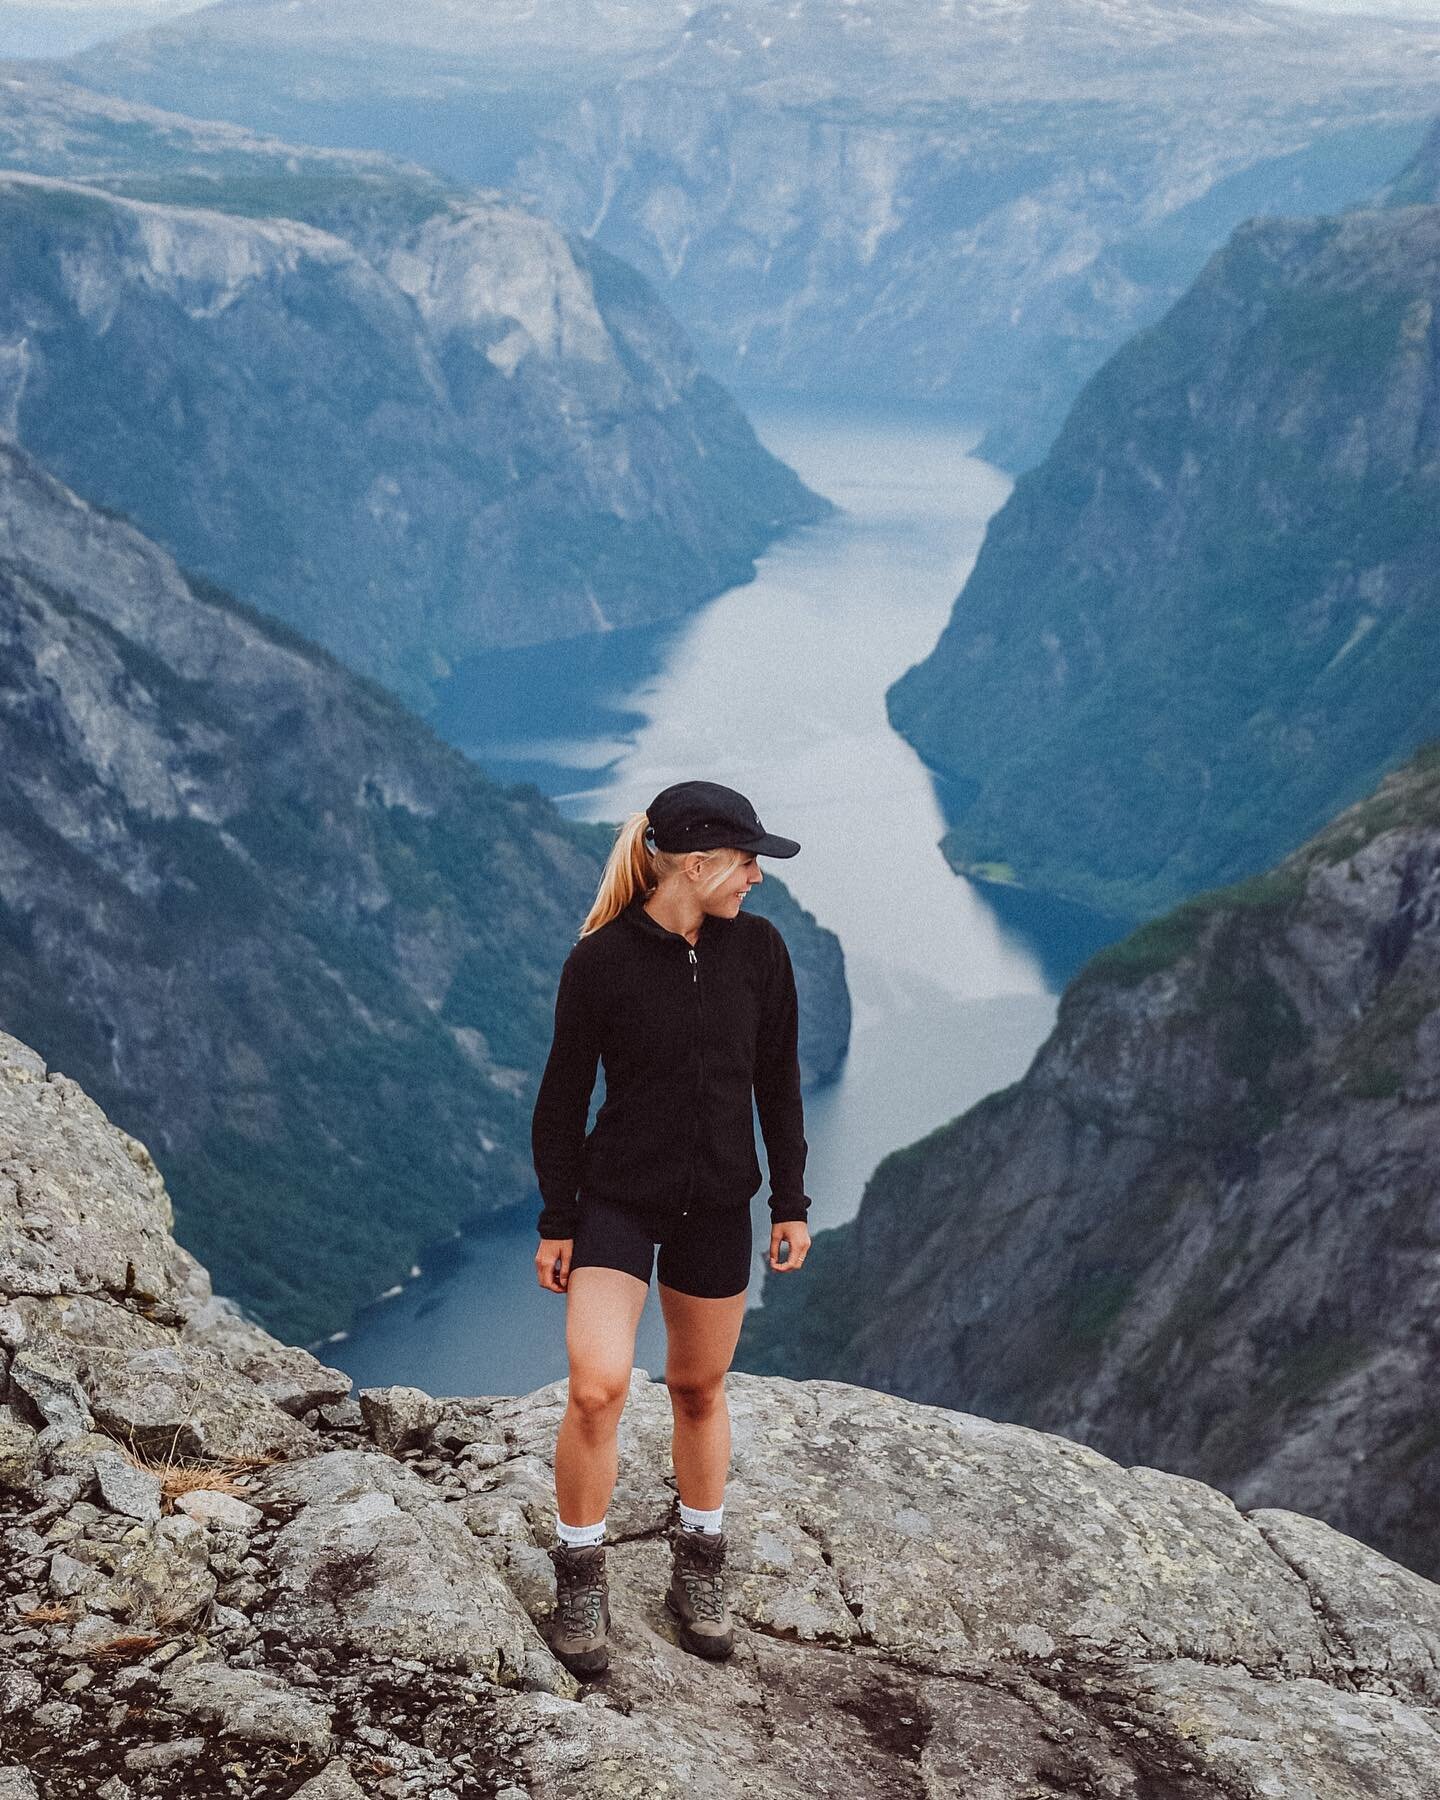 Spending time in the mountains is probably  one of my greatest sources of energy.
Specially when the view looks like this 💙
&bull;
&bull;
&bull;
#norway #norwaytravel #swissmountaingirls #moutaingirls #rausaberrichtig #whateverman #whatevermanlifest